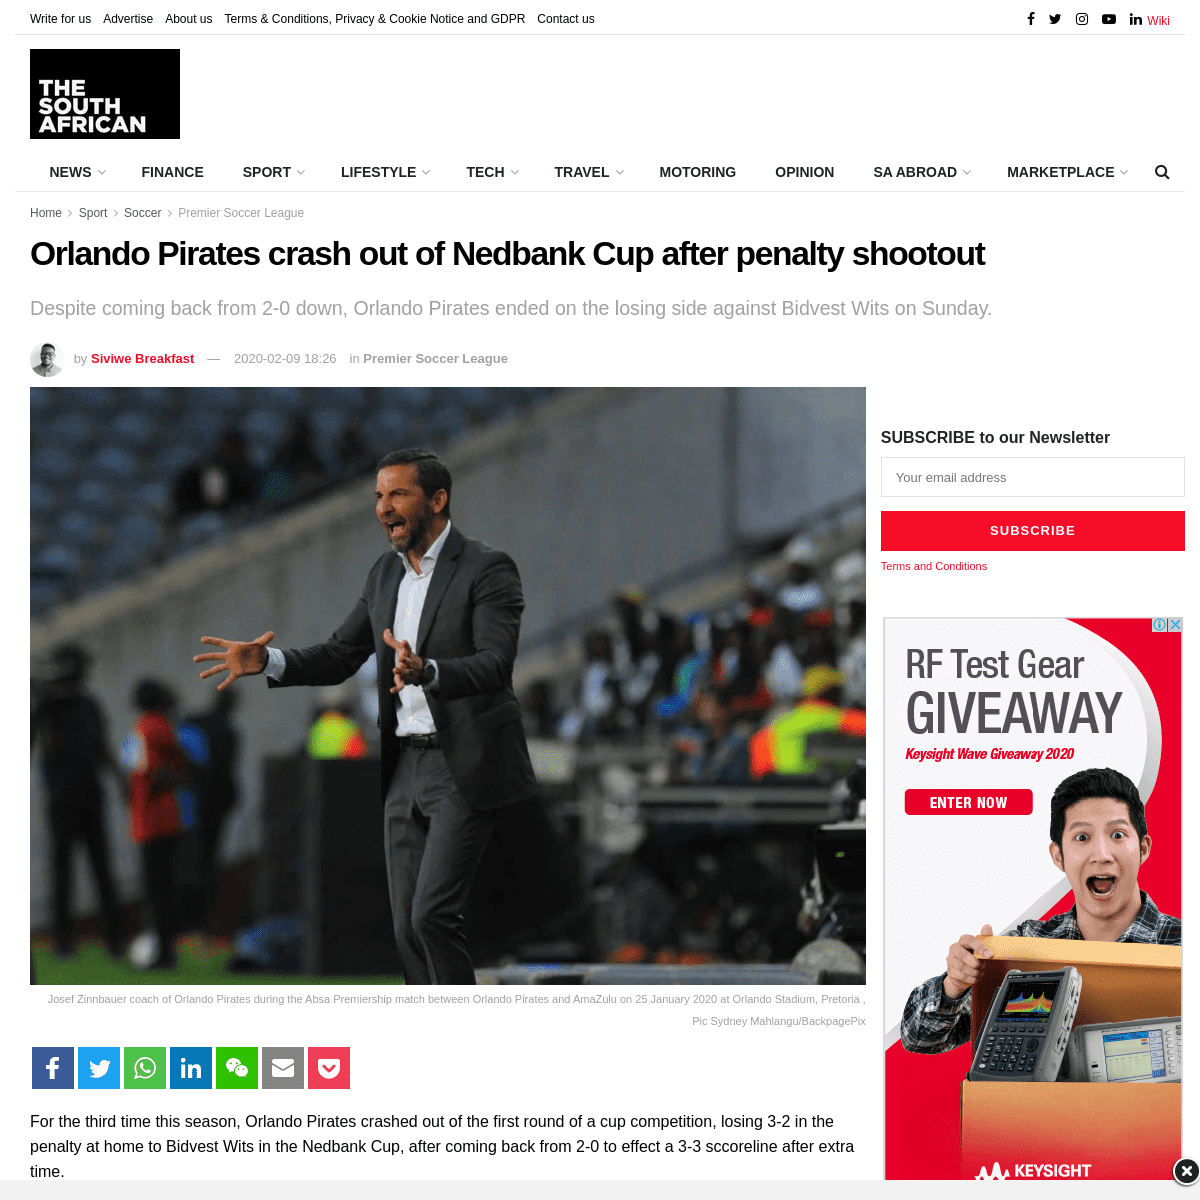 A complete backup of www.thesouthafrican.com/sport/soccer/psl-south-africa/orlando-pirates-crash-out-of-nedbank-cup-after-penalt